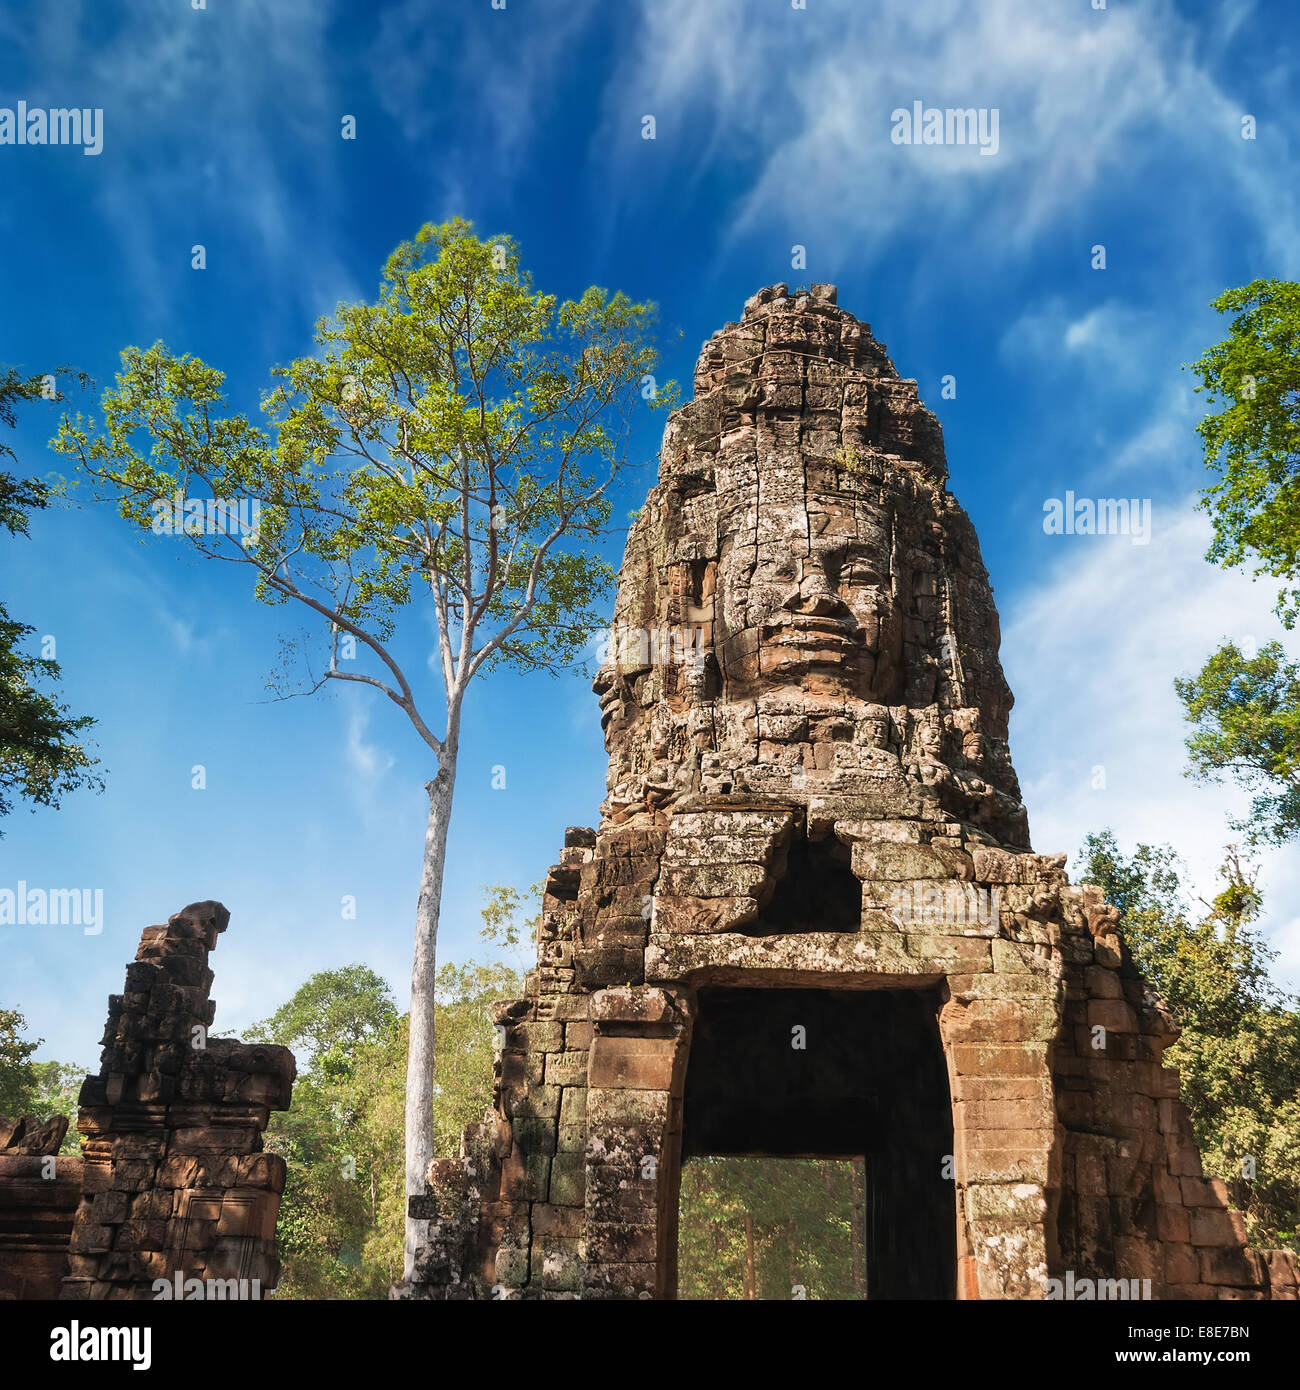 Ancient Khmer architecture. Buddha face at Ta Prohm temple entrance gate. Angkor Wat complex, Siem Reap, Cambodia travel destina Stock Photo